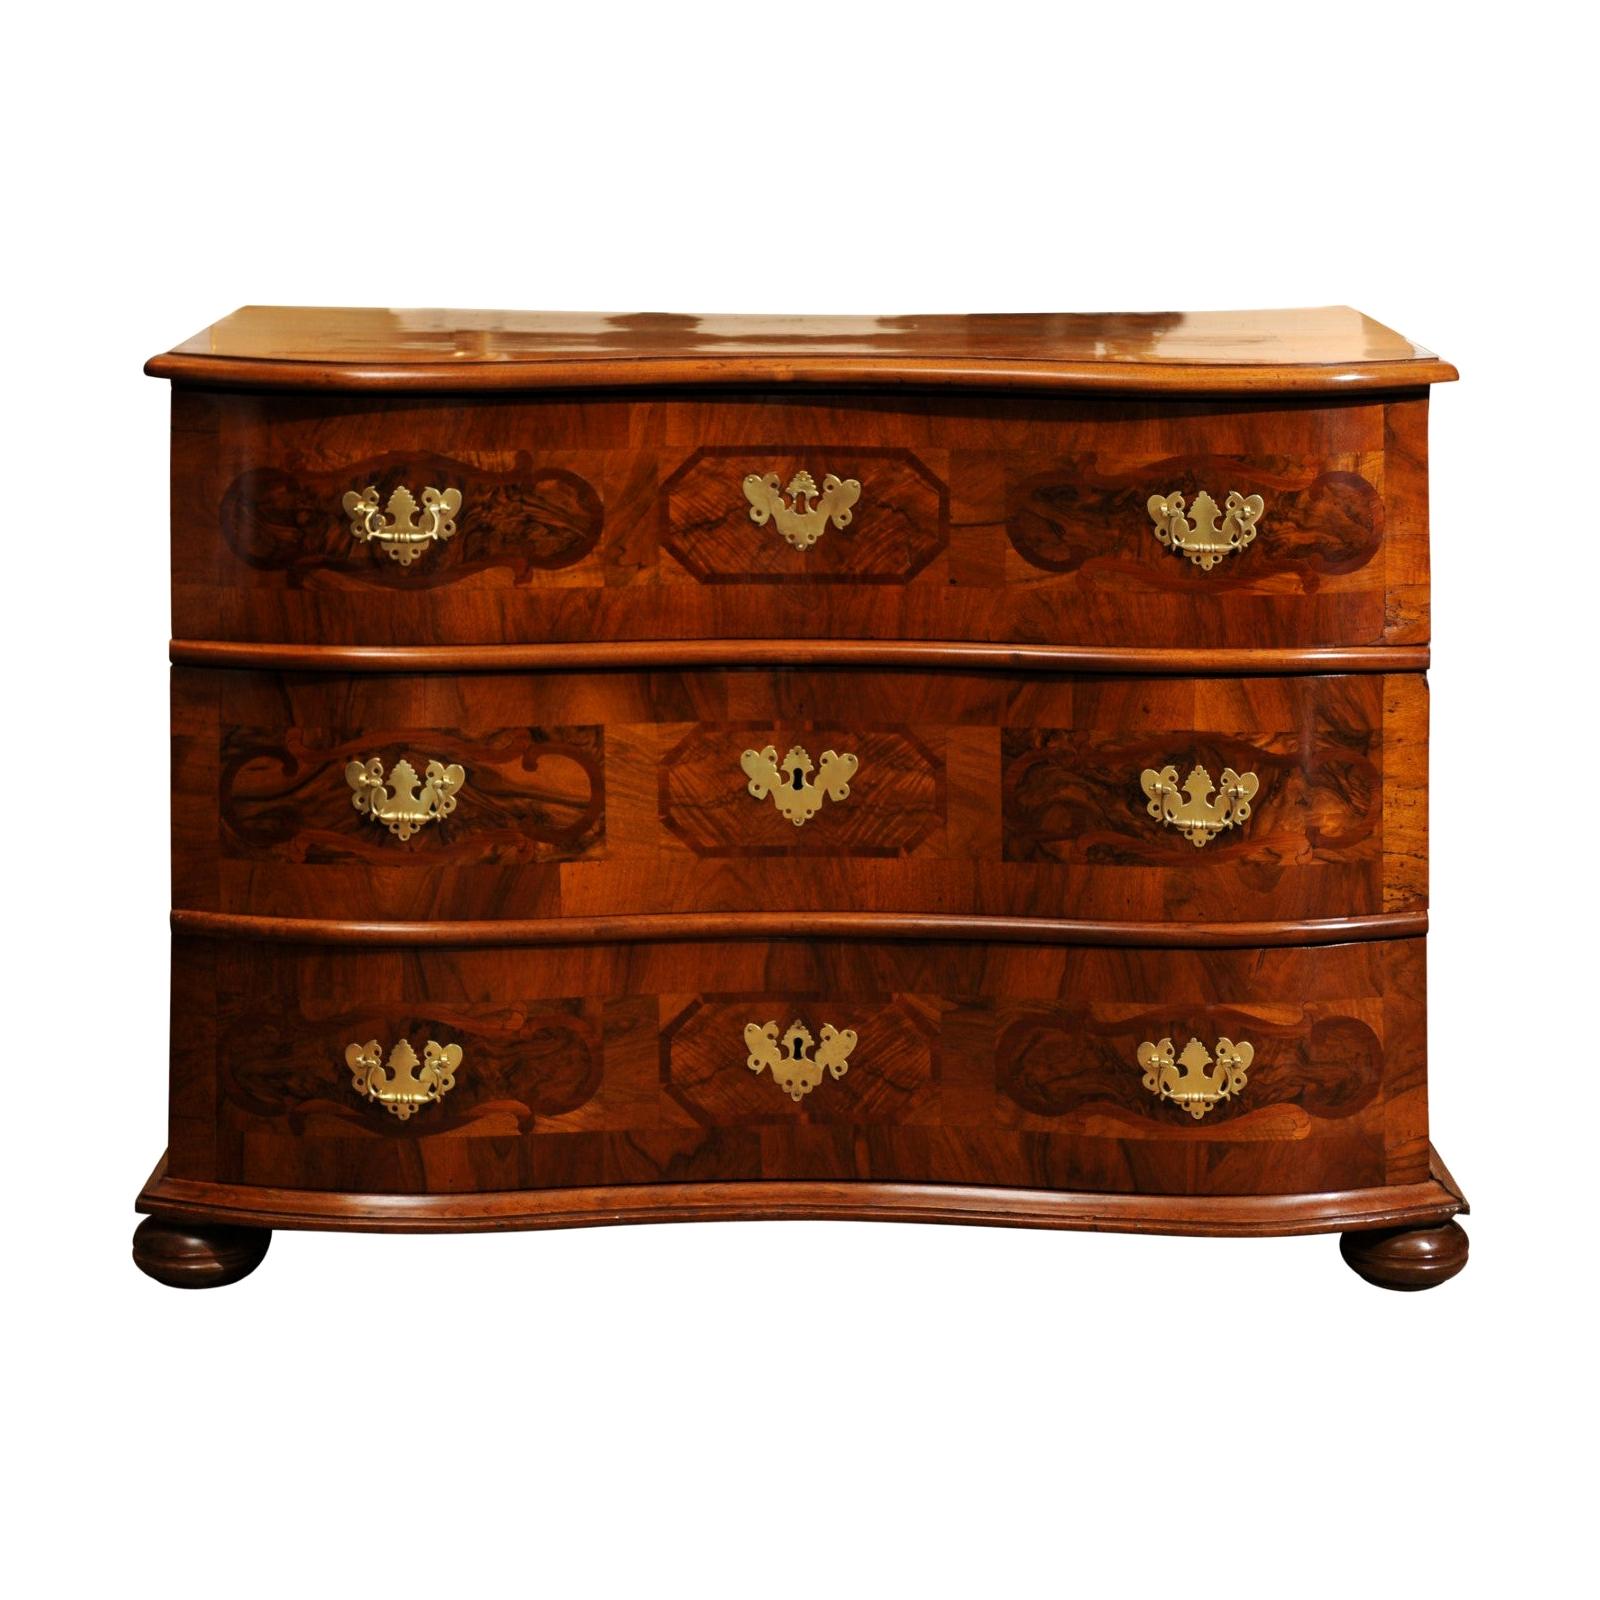 19th Century German Walnut Commode with Parquetry Inlay and Bun Feet